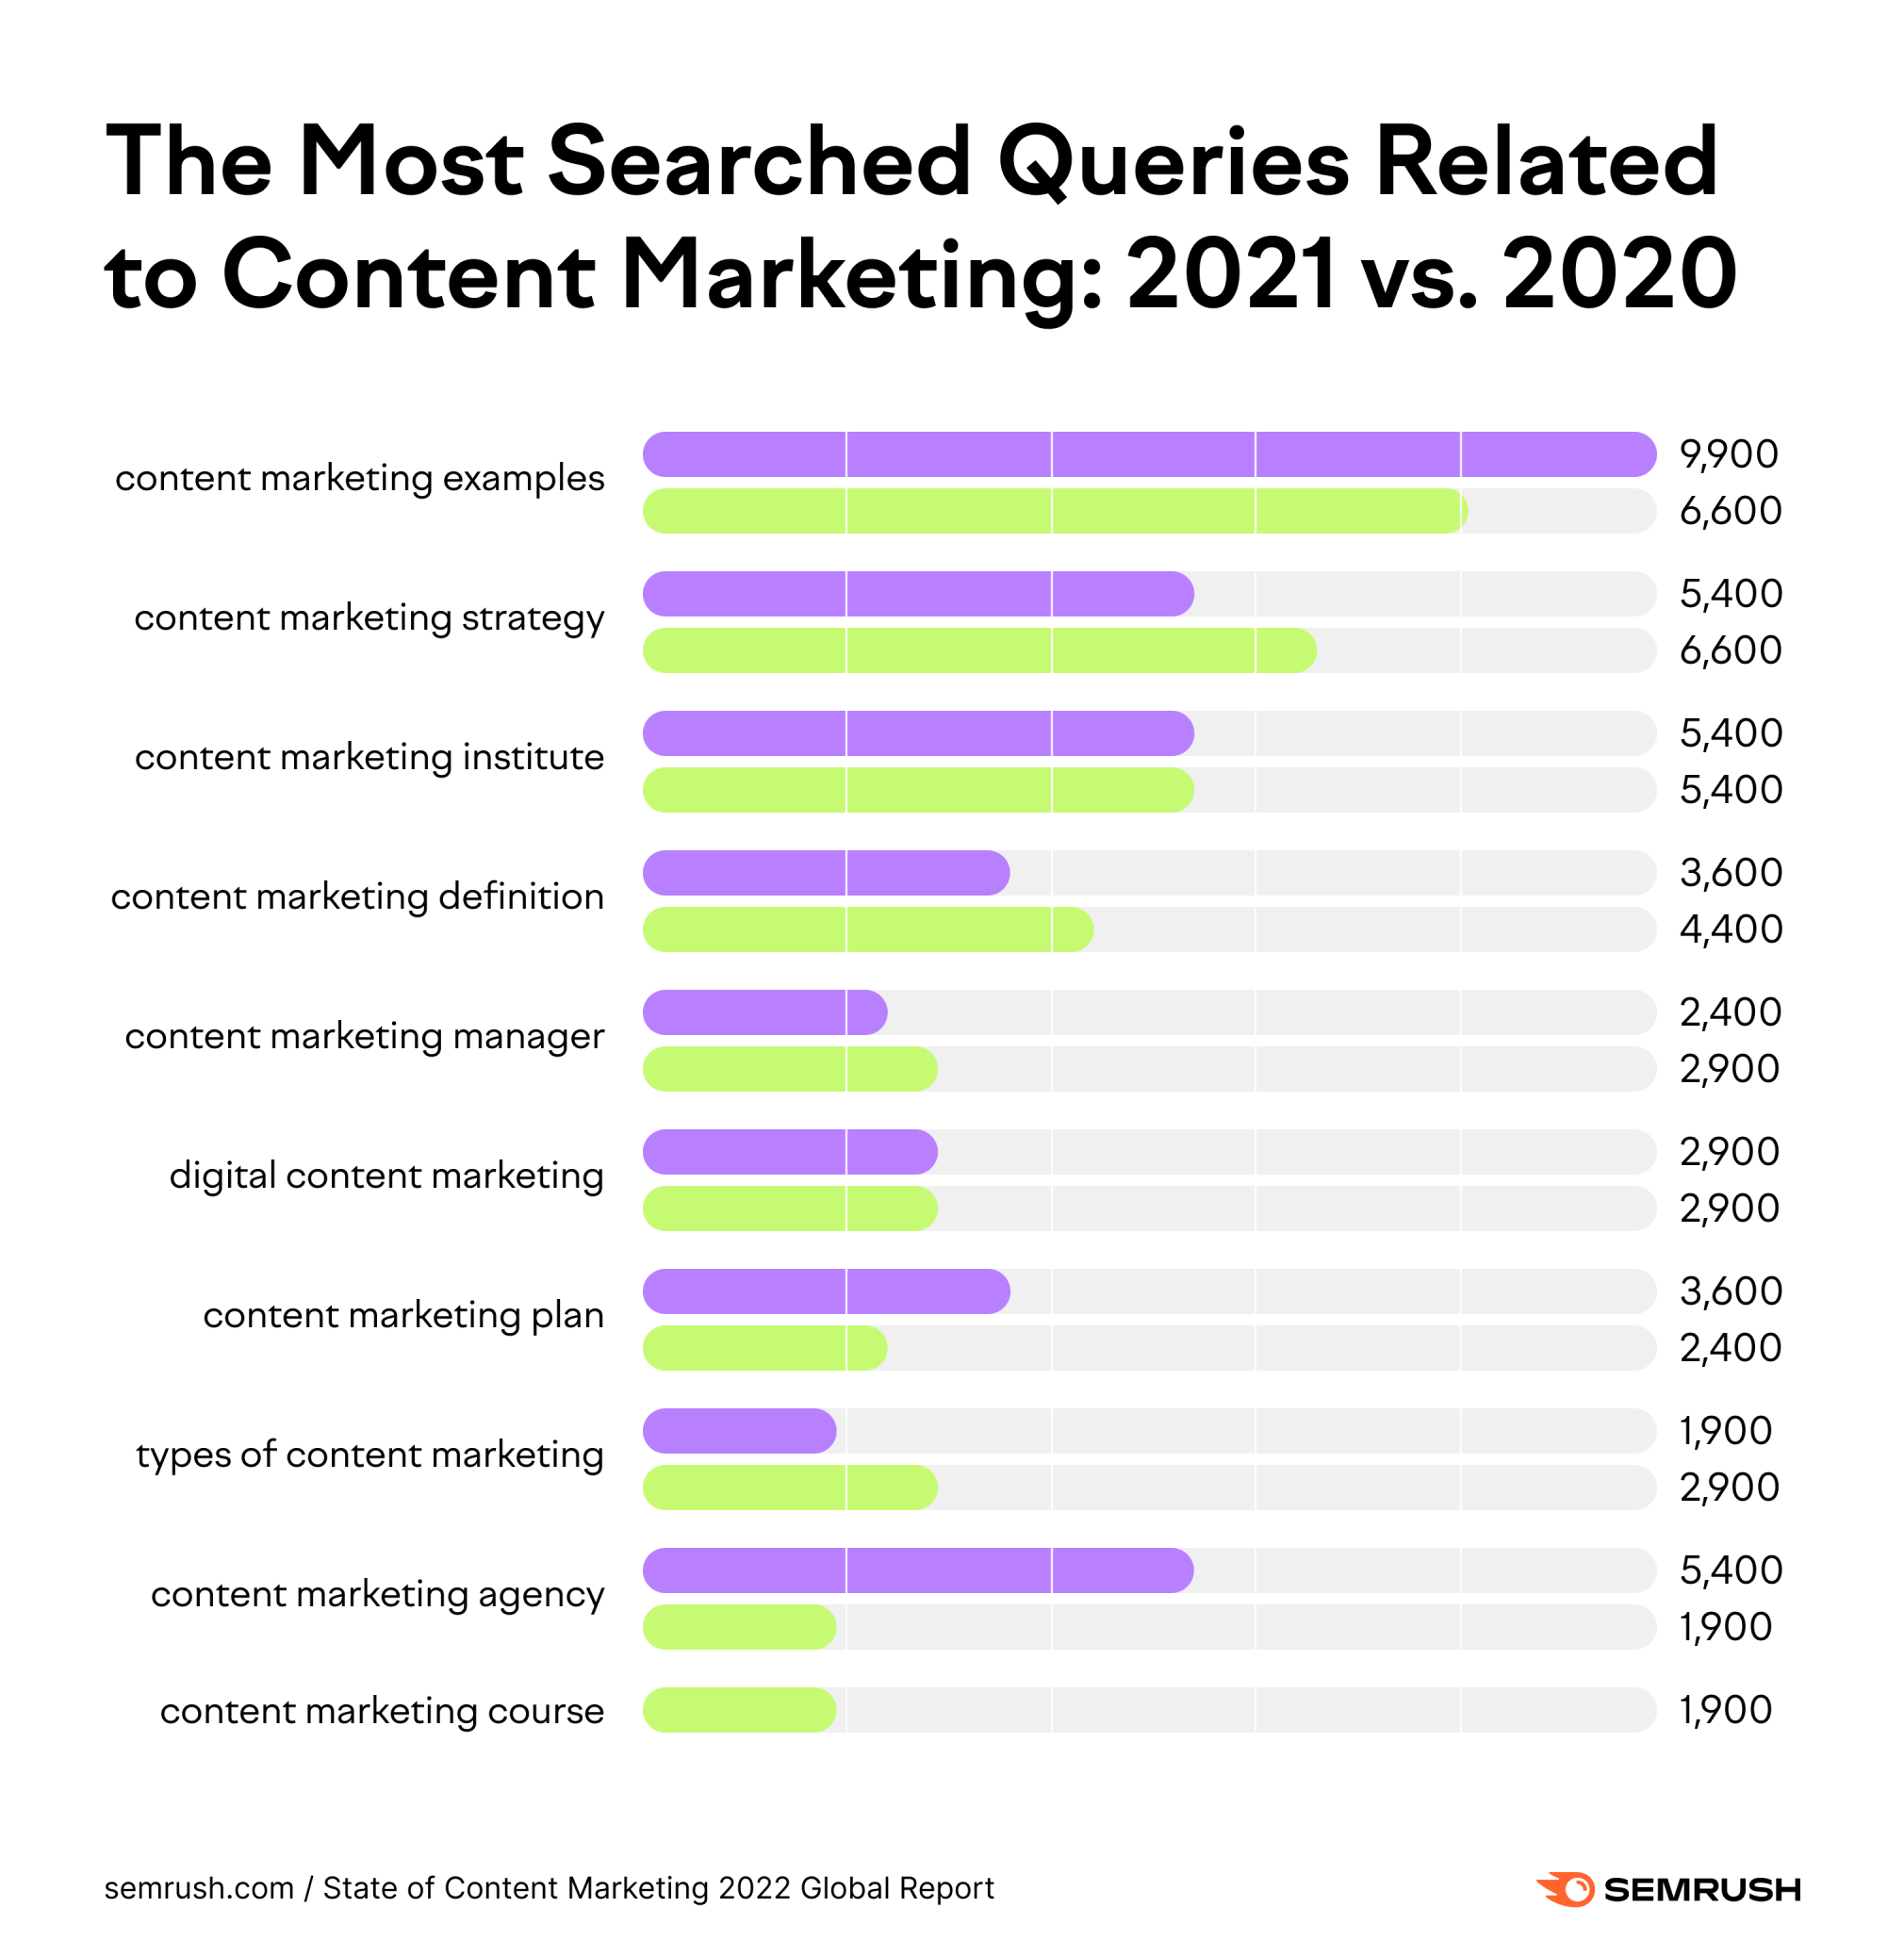 The most searched keywords in content marketing